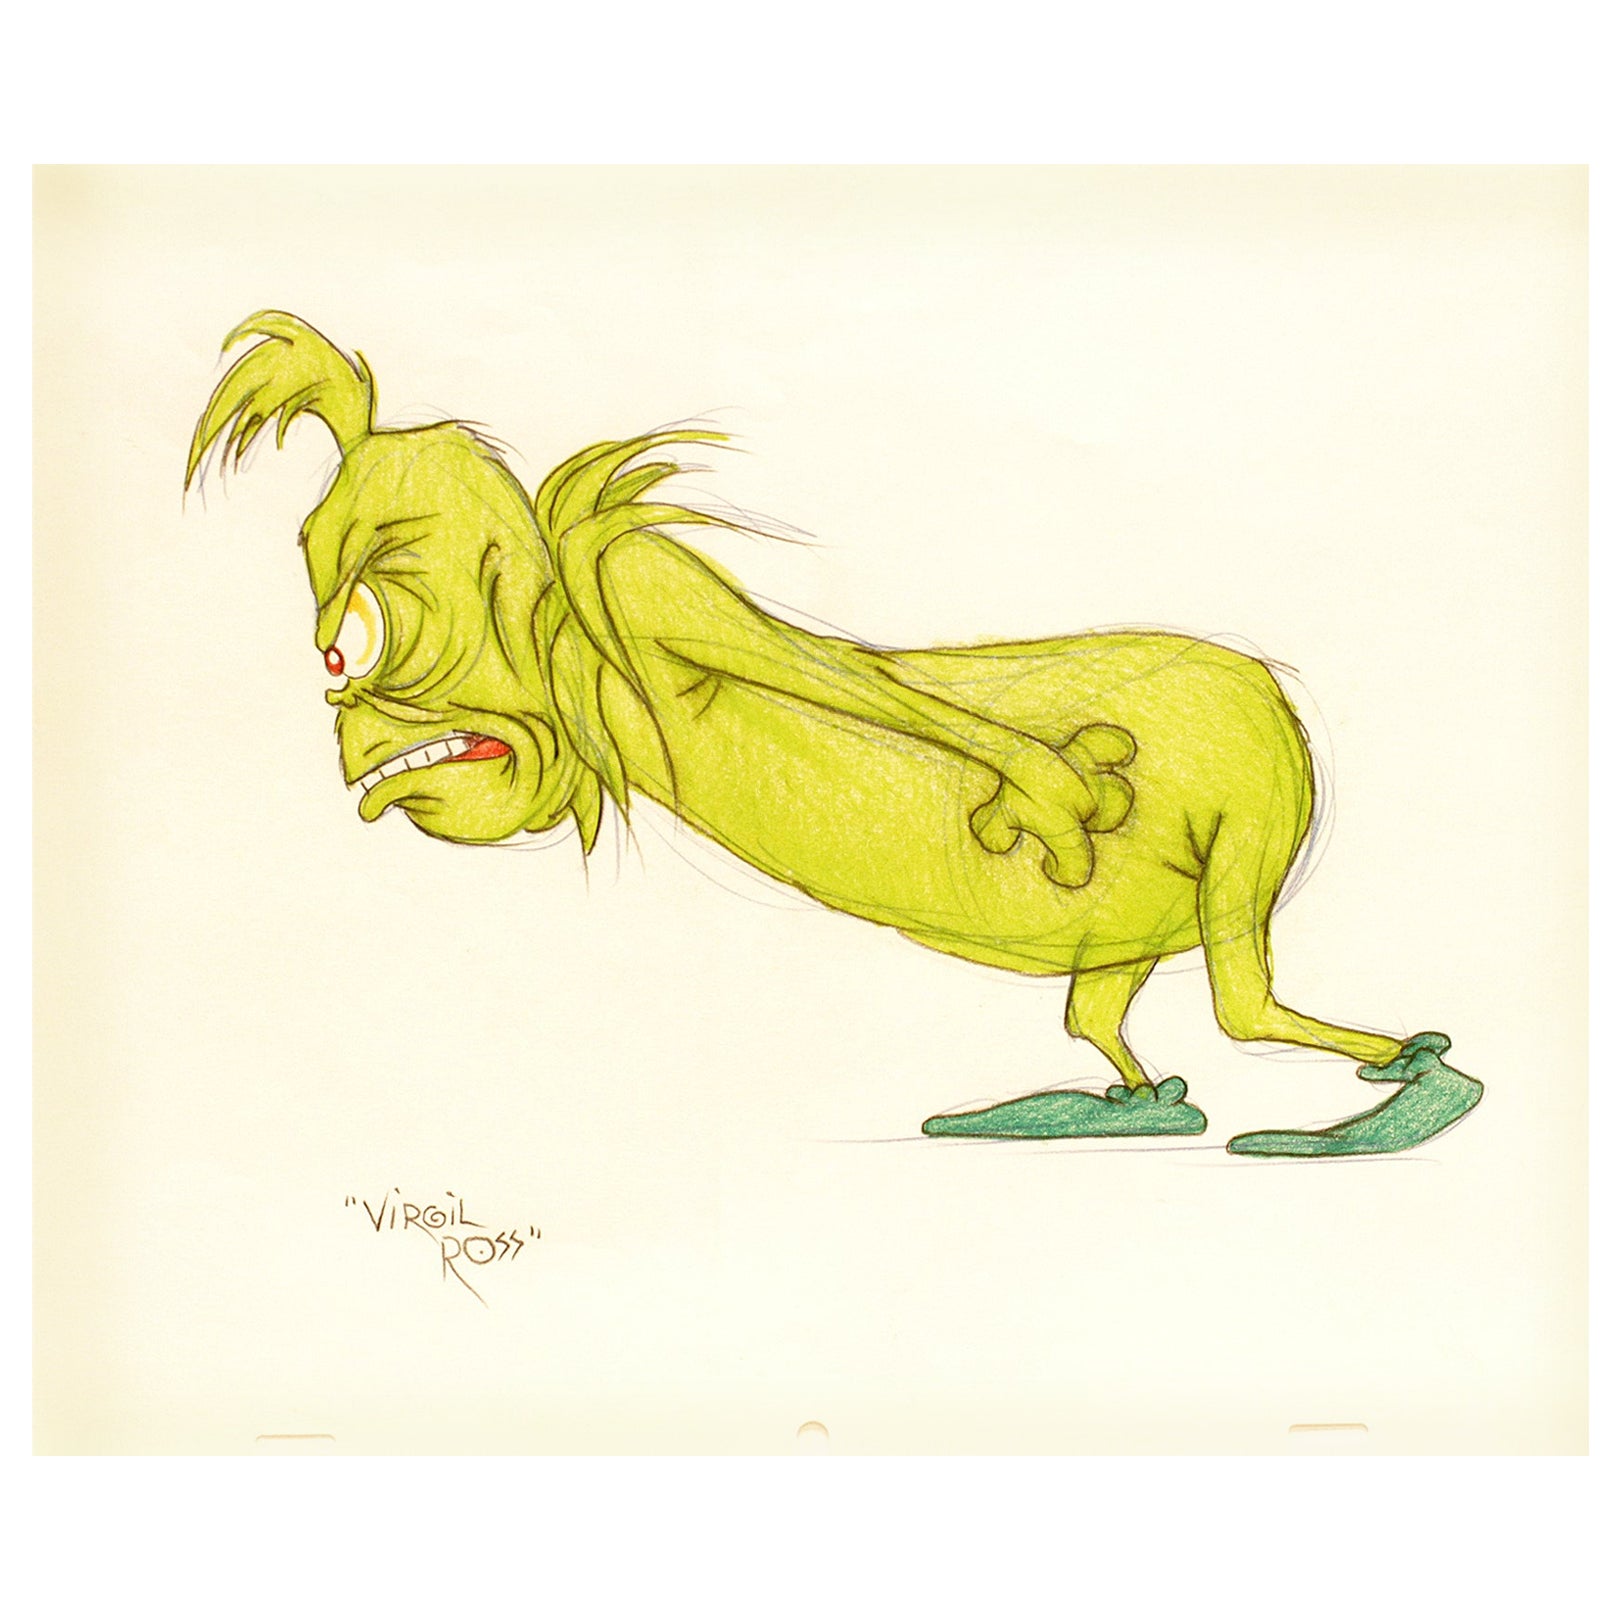 Dr. Seuss 'Virgil Ross', 'Original Drawing' How the Grinch Stole Christmas